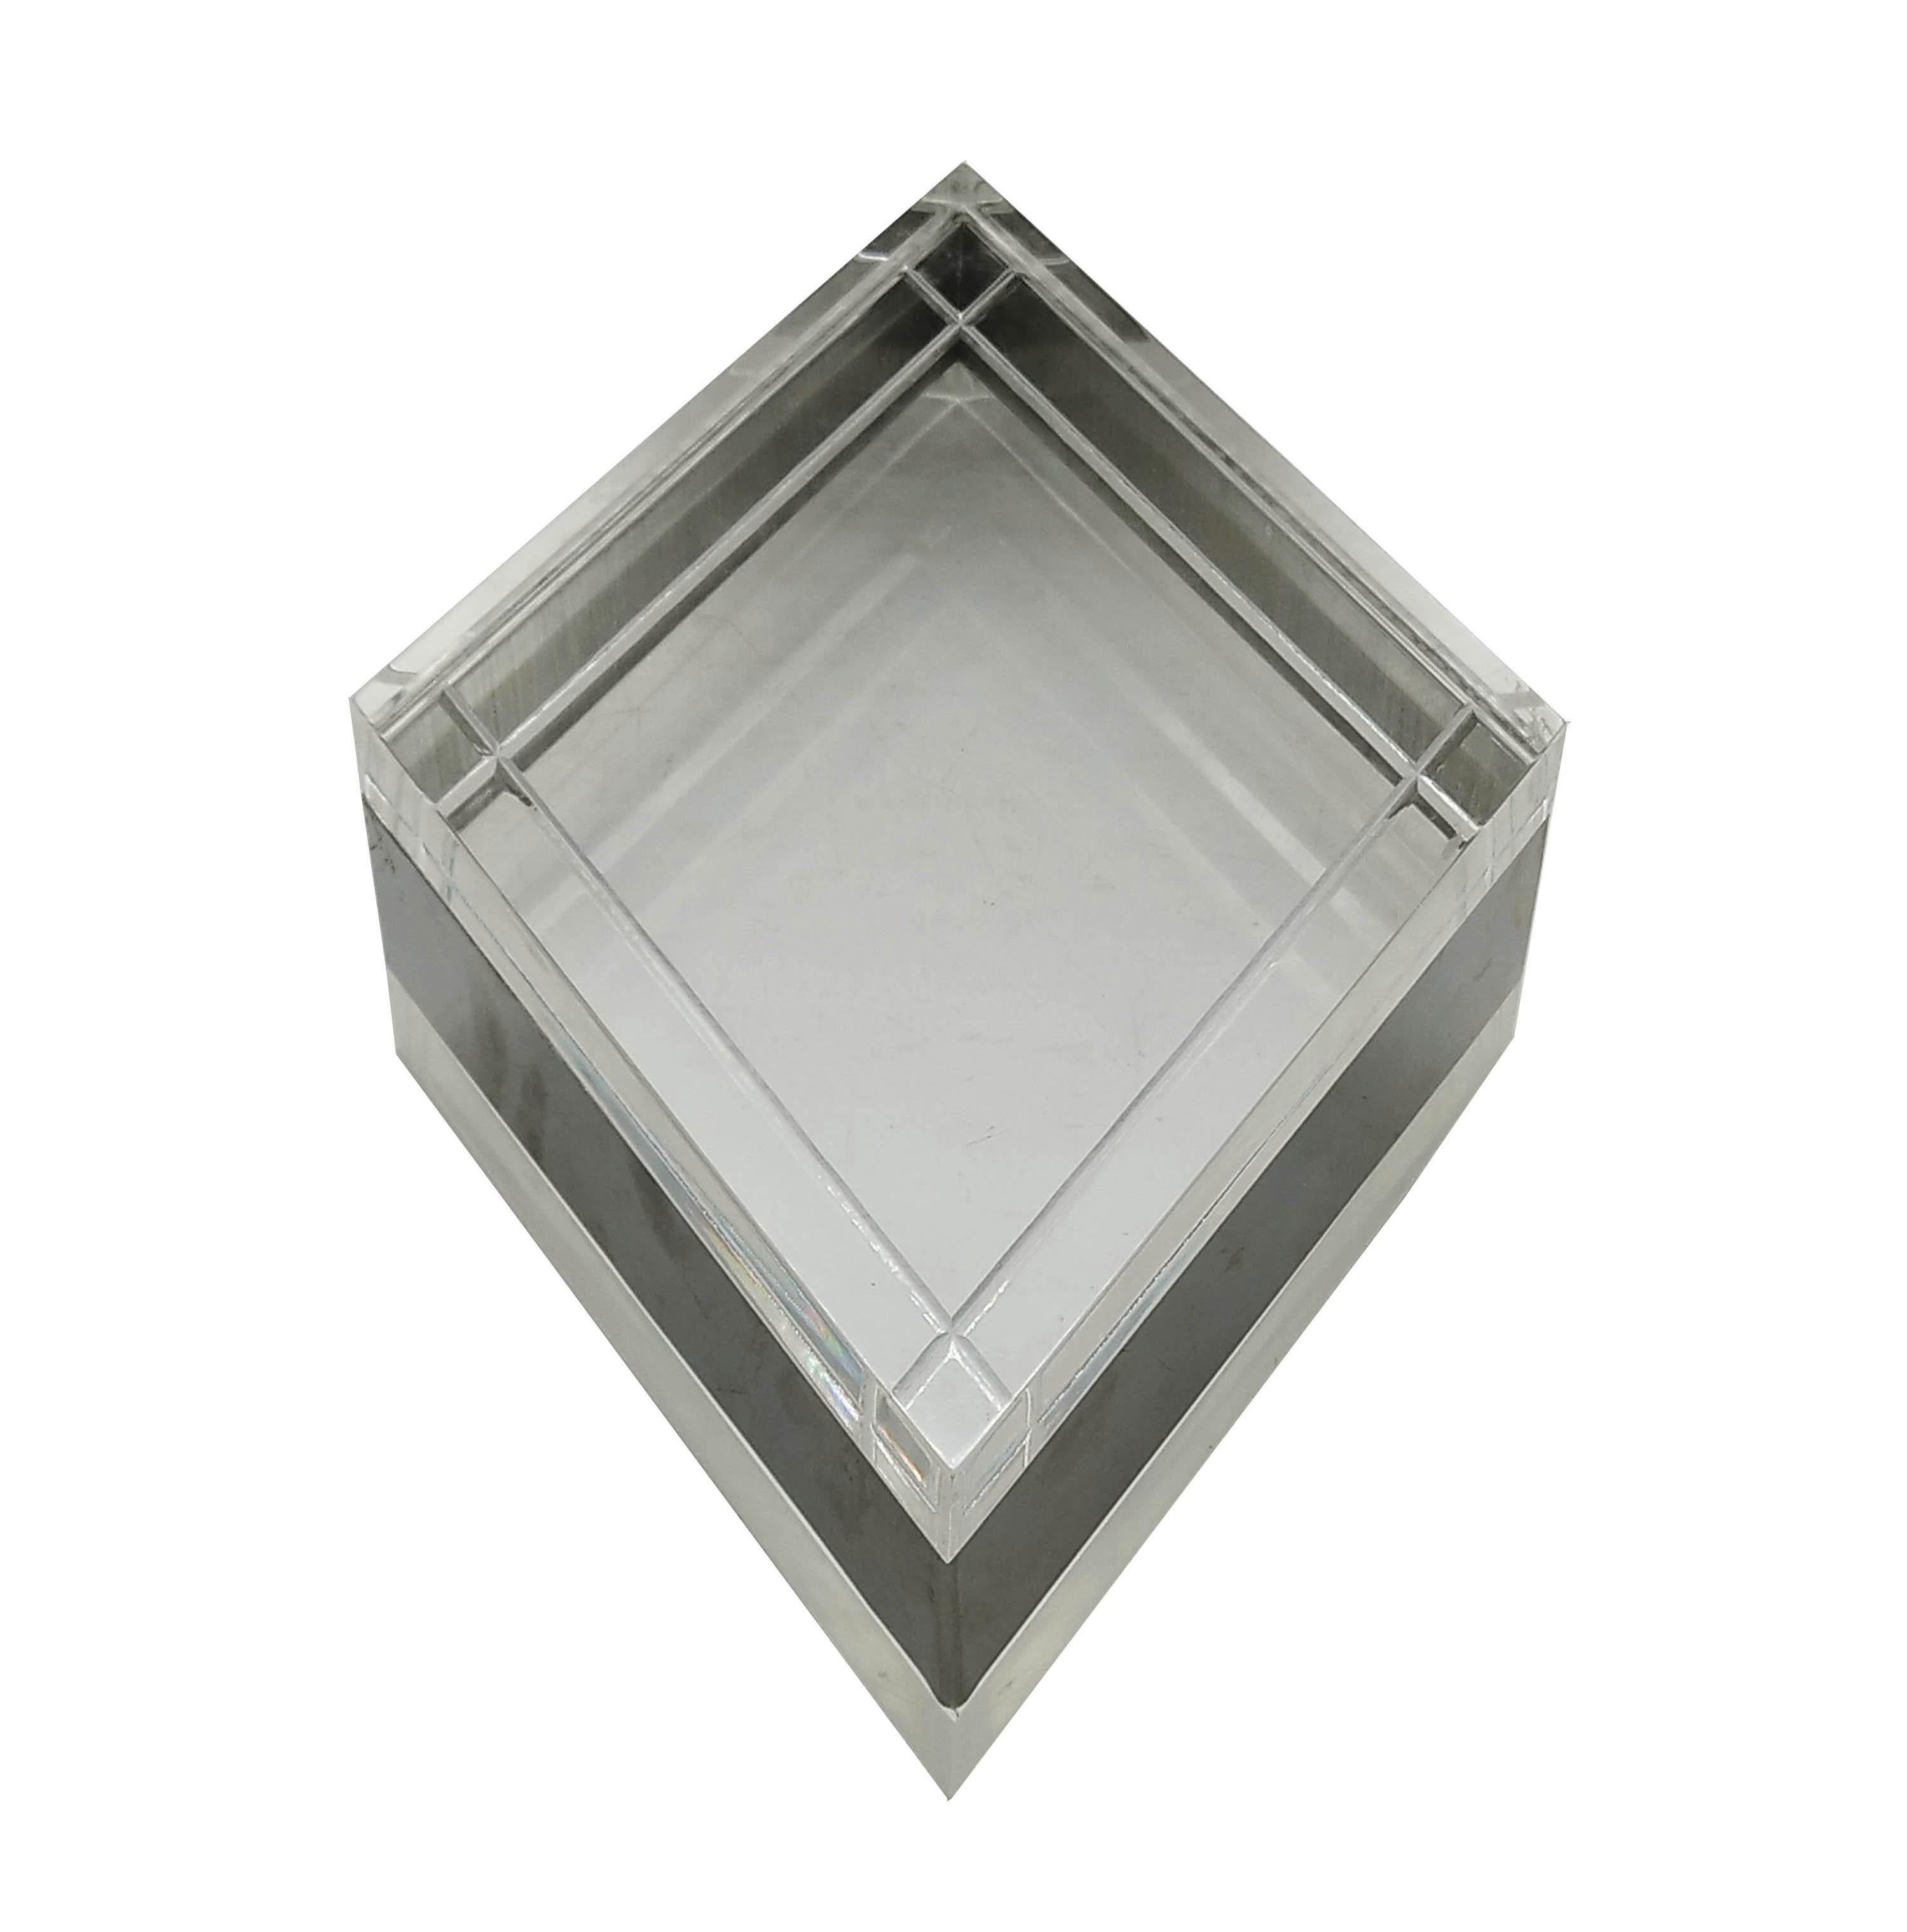 Decorative rhombus-shaped box in lucite and silver. This object was designed in the 1970s. Inspired by Gabriella Crespi.
   